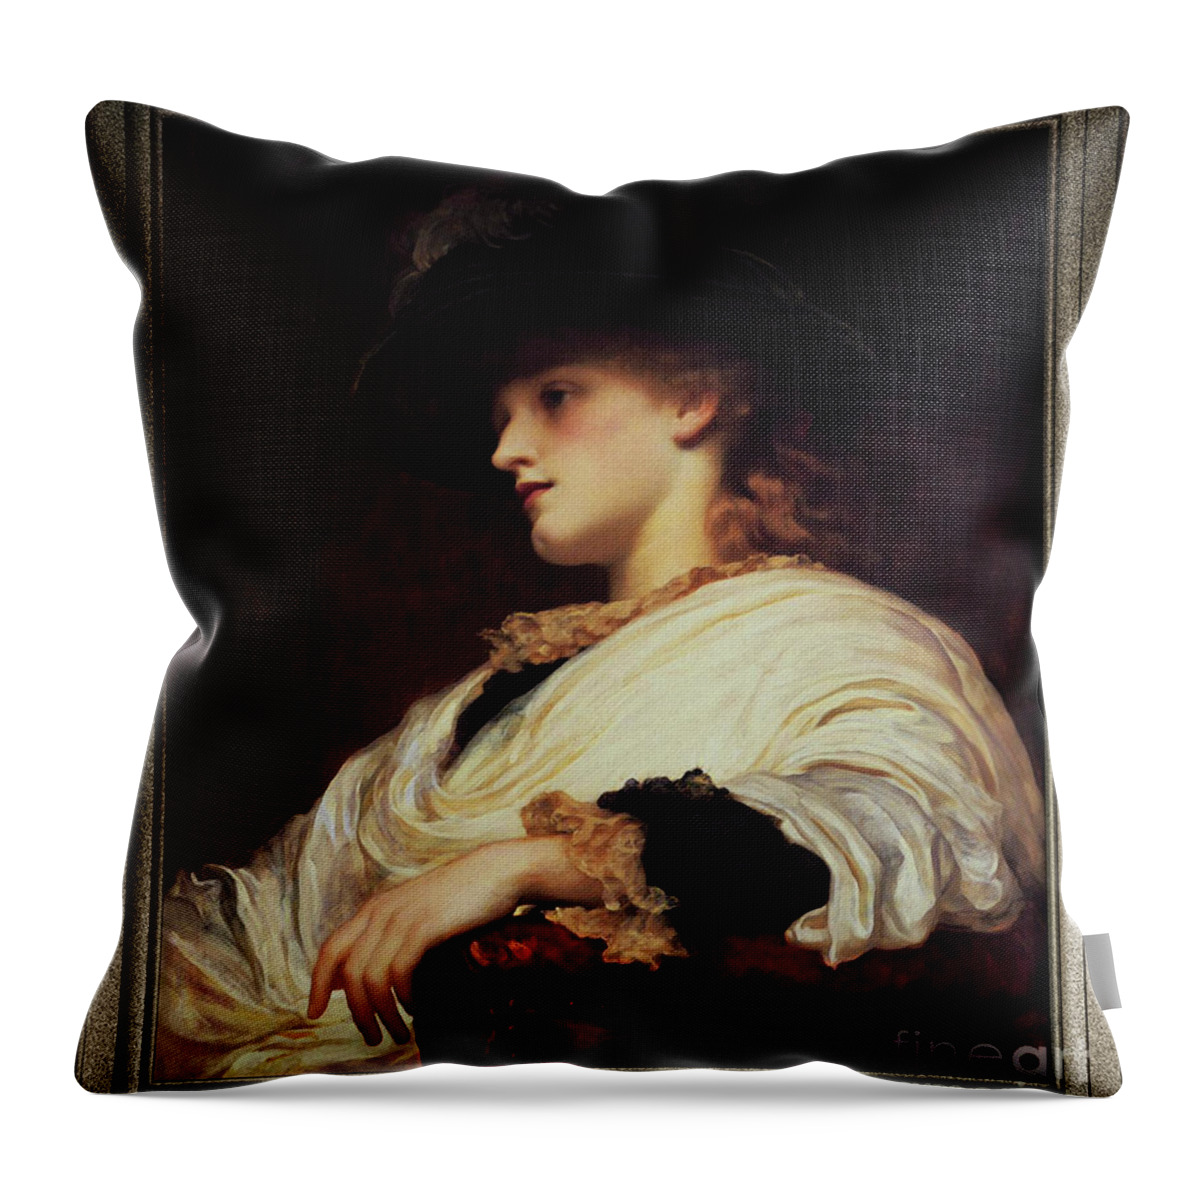 Phoebe Throw Pillow featuring the painting Phoebe by Frederic Leighton by Rolando Burbon